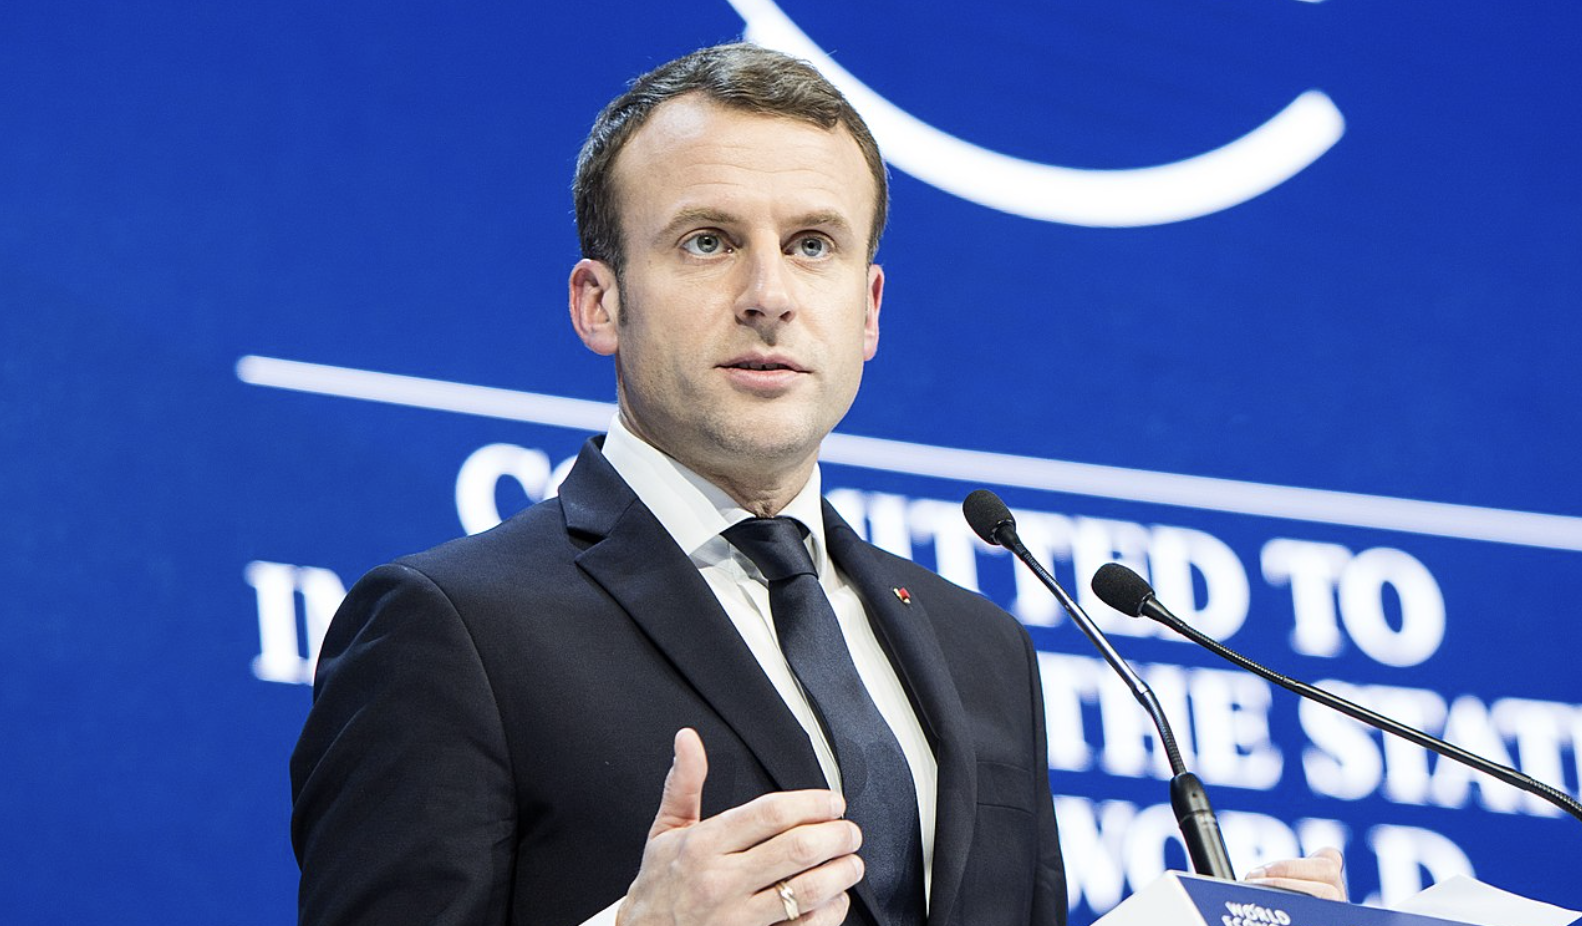 Emmanuel Macron, fot. Par Foundations World Economic Forum — Special Address by Emmanuel Macron, President of France, CC BY 2.0, https://commons.wikimedia.org/w/index.php?curid=67111504